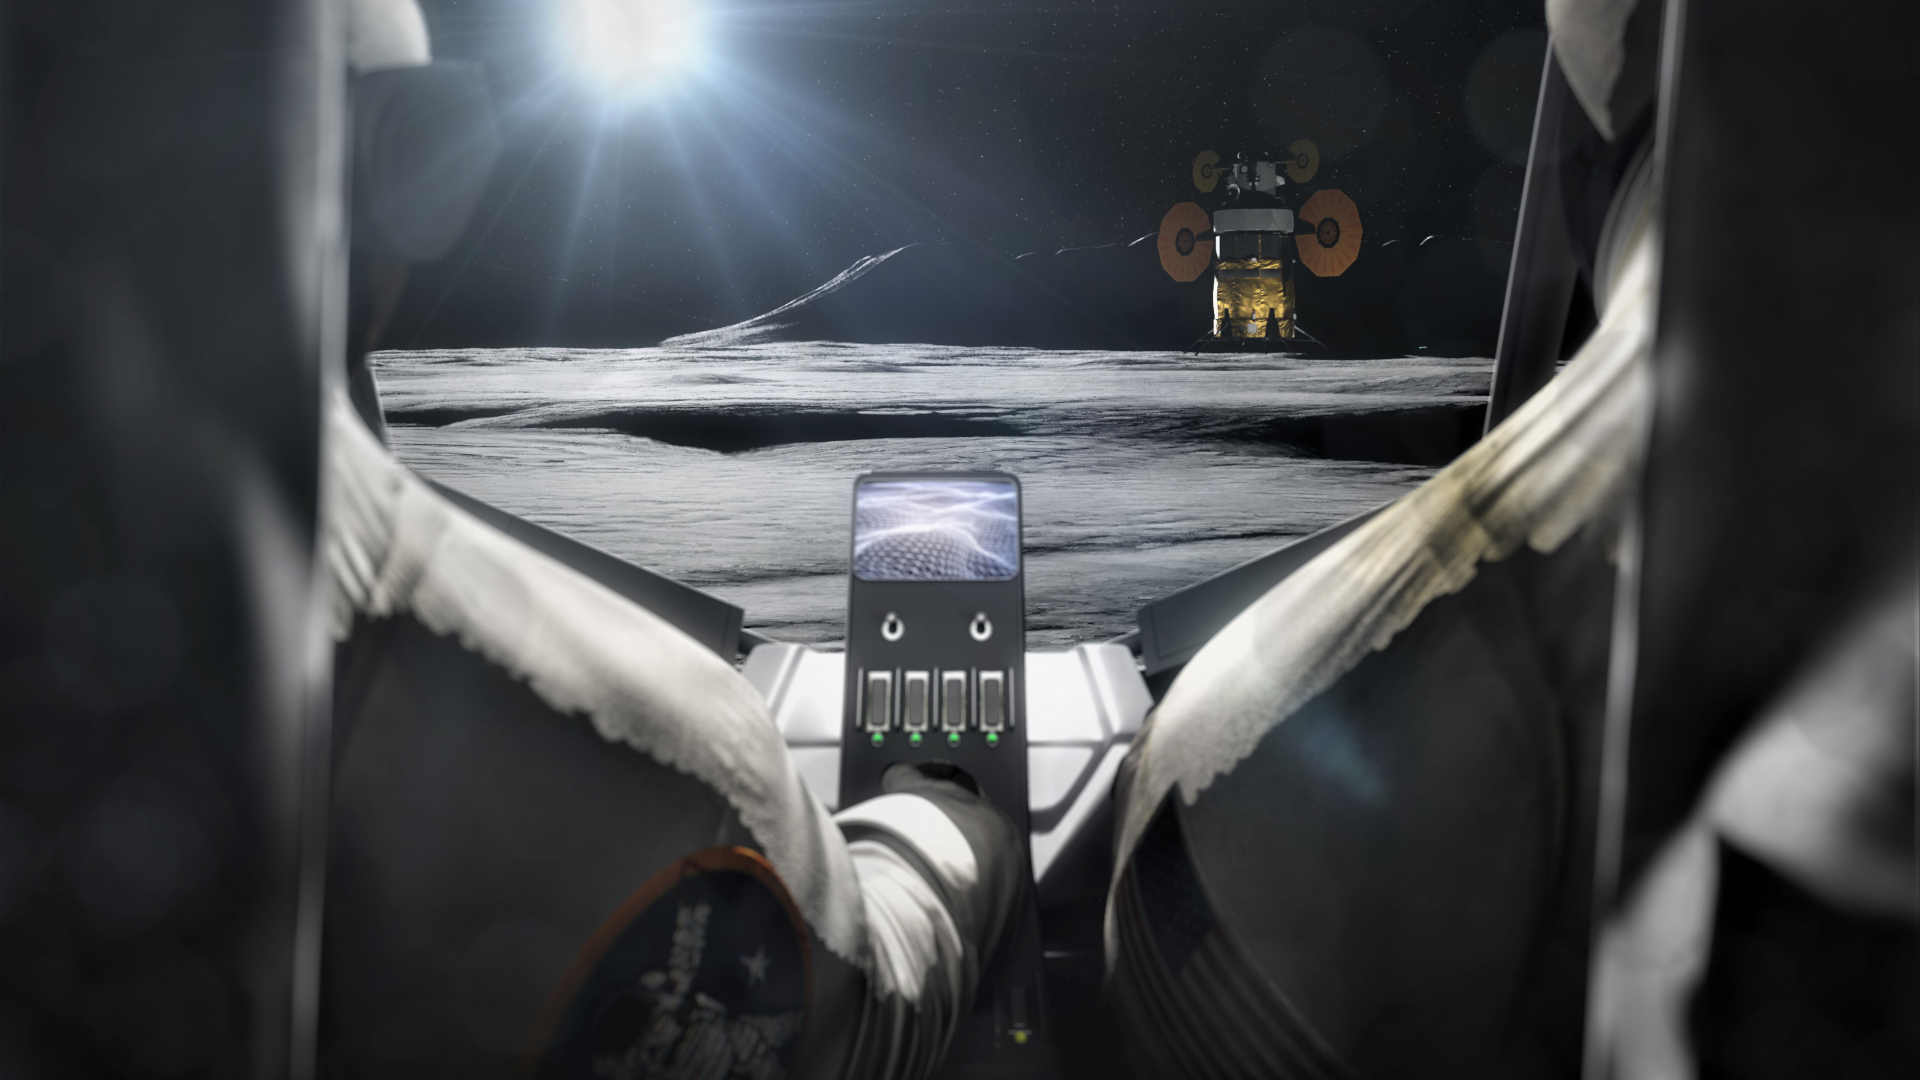 Concept image showing the backseat view in a Lunar Terrain Vehicle.